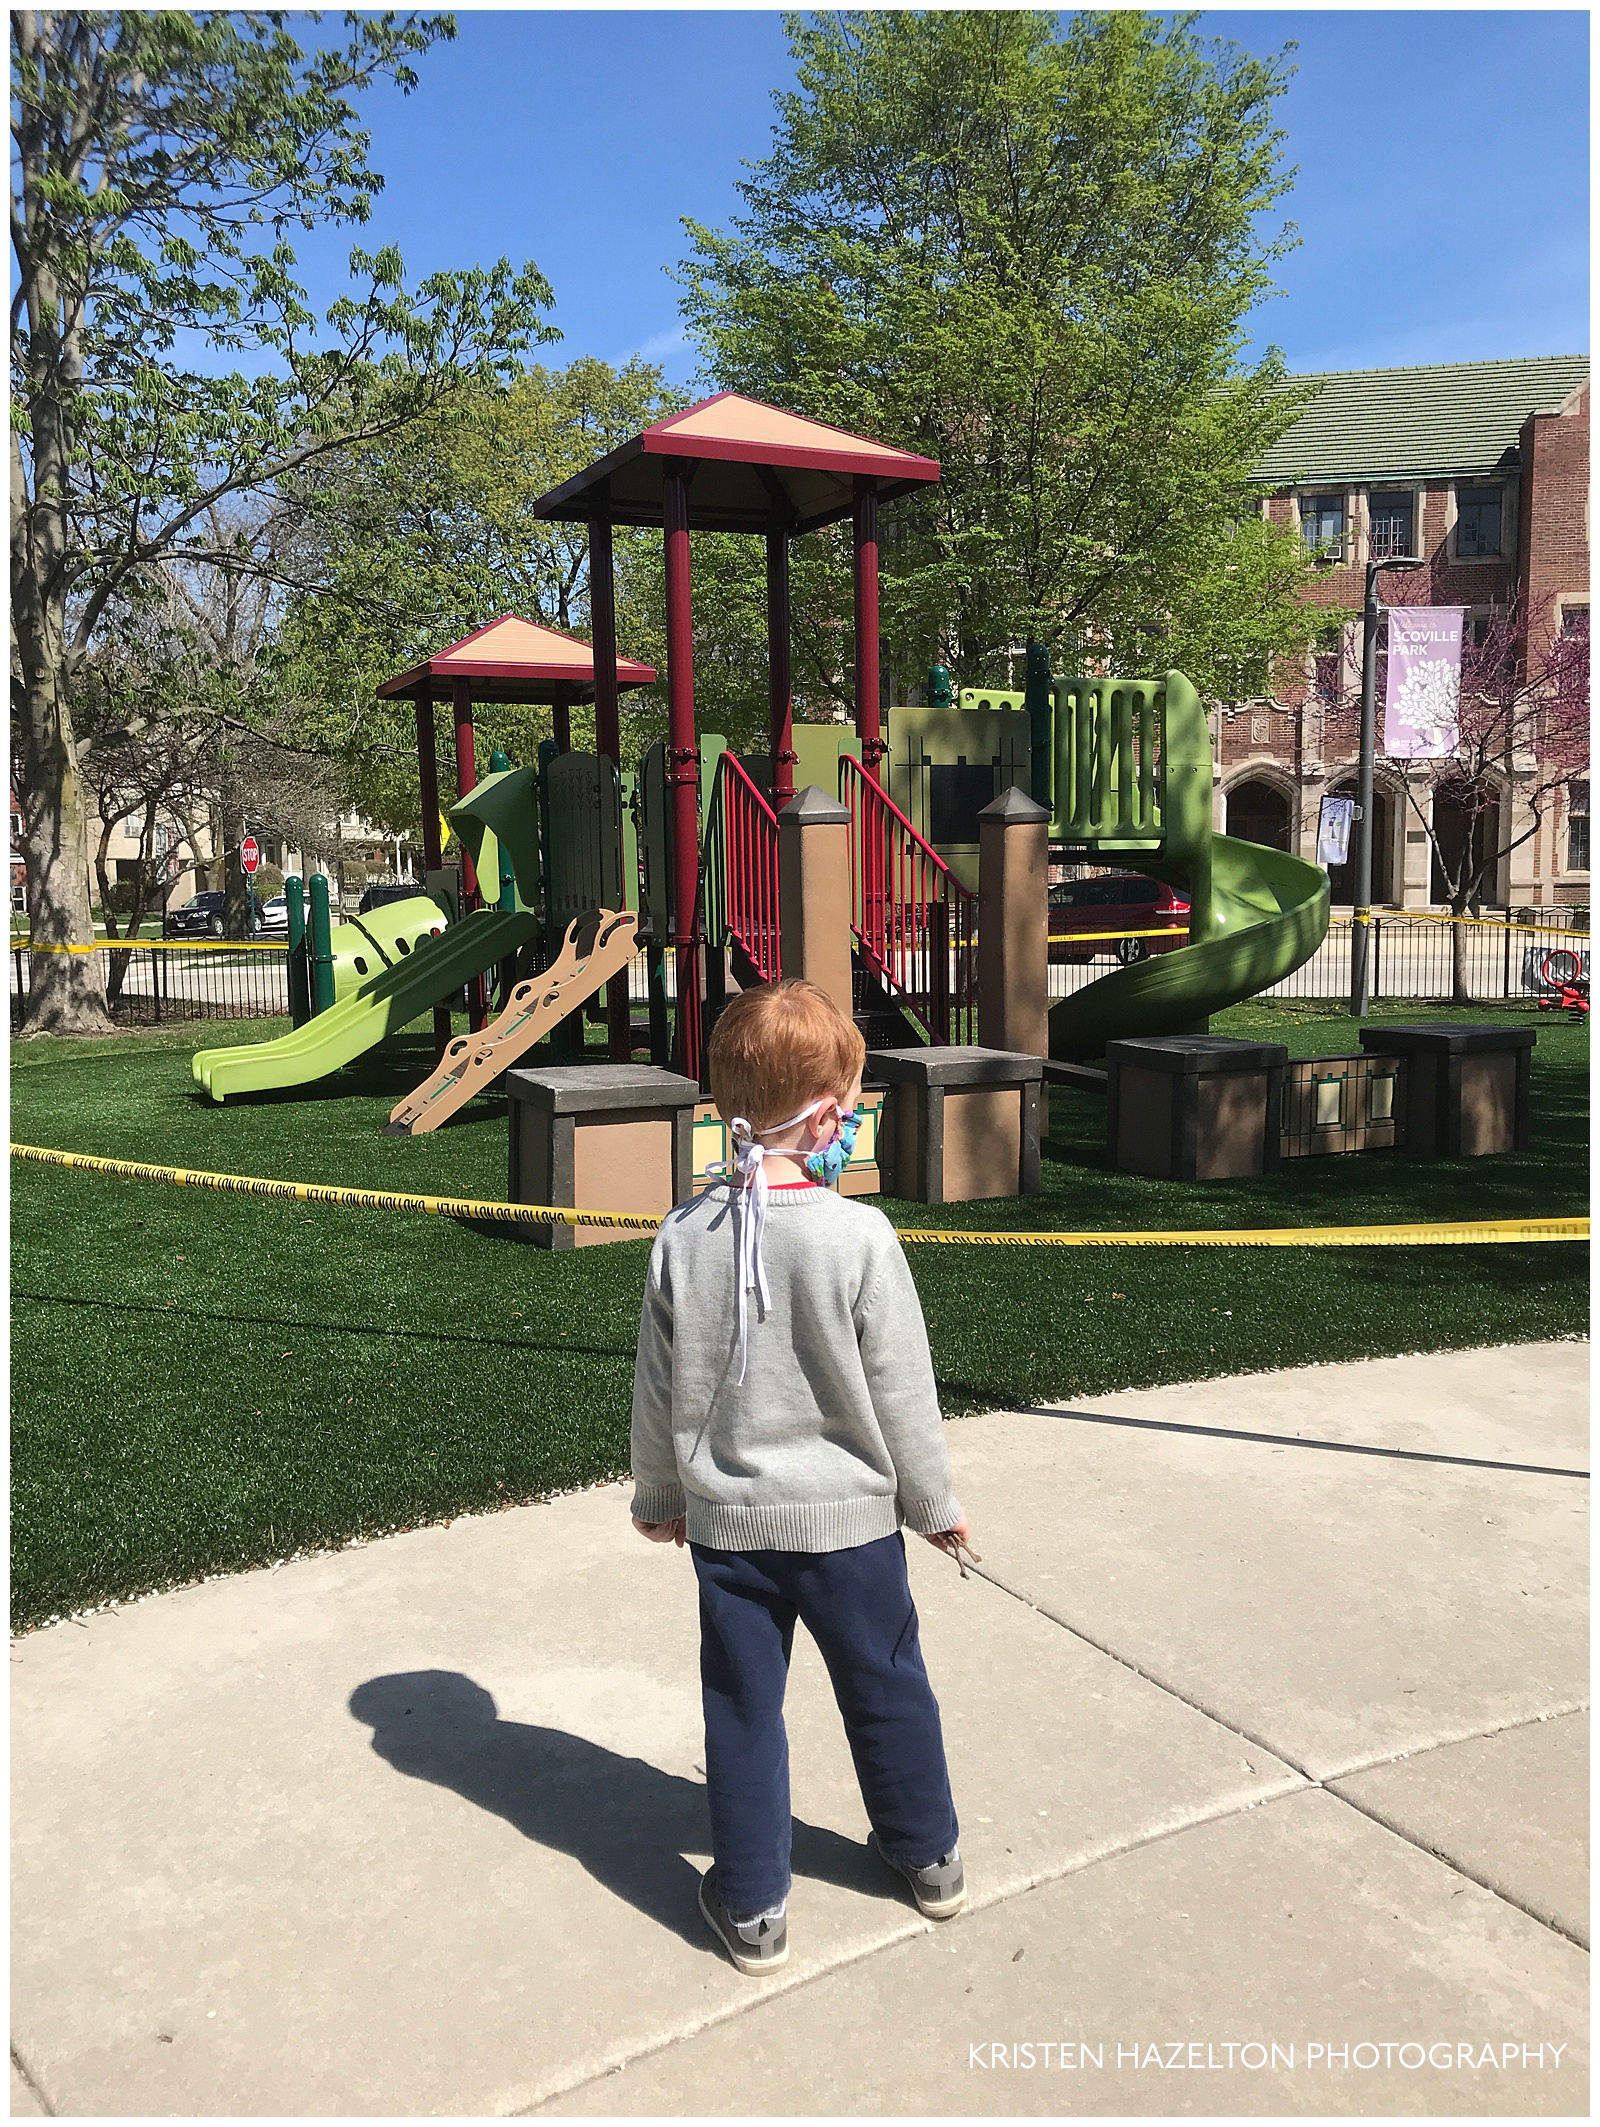 Toddler looking at a playground closed off with warning tape due to the COVID-19 pandemic